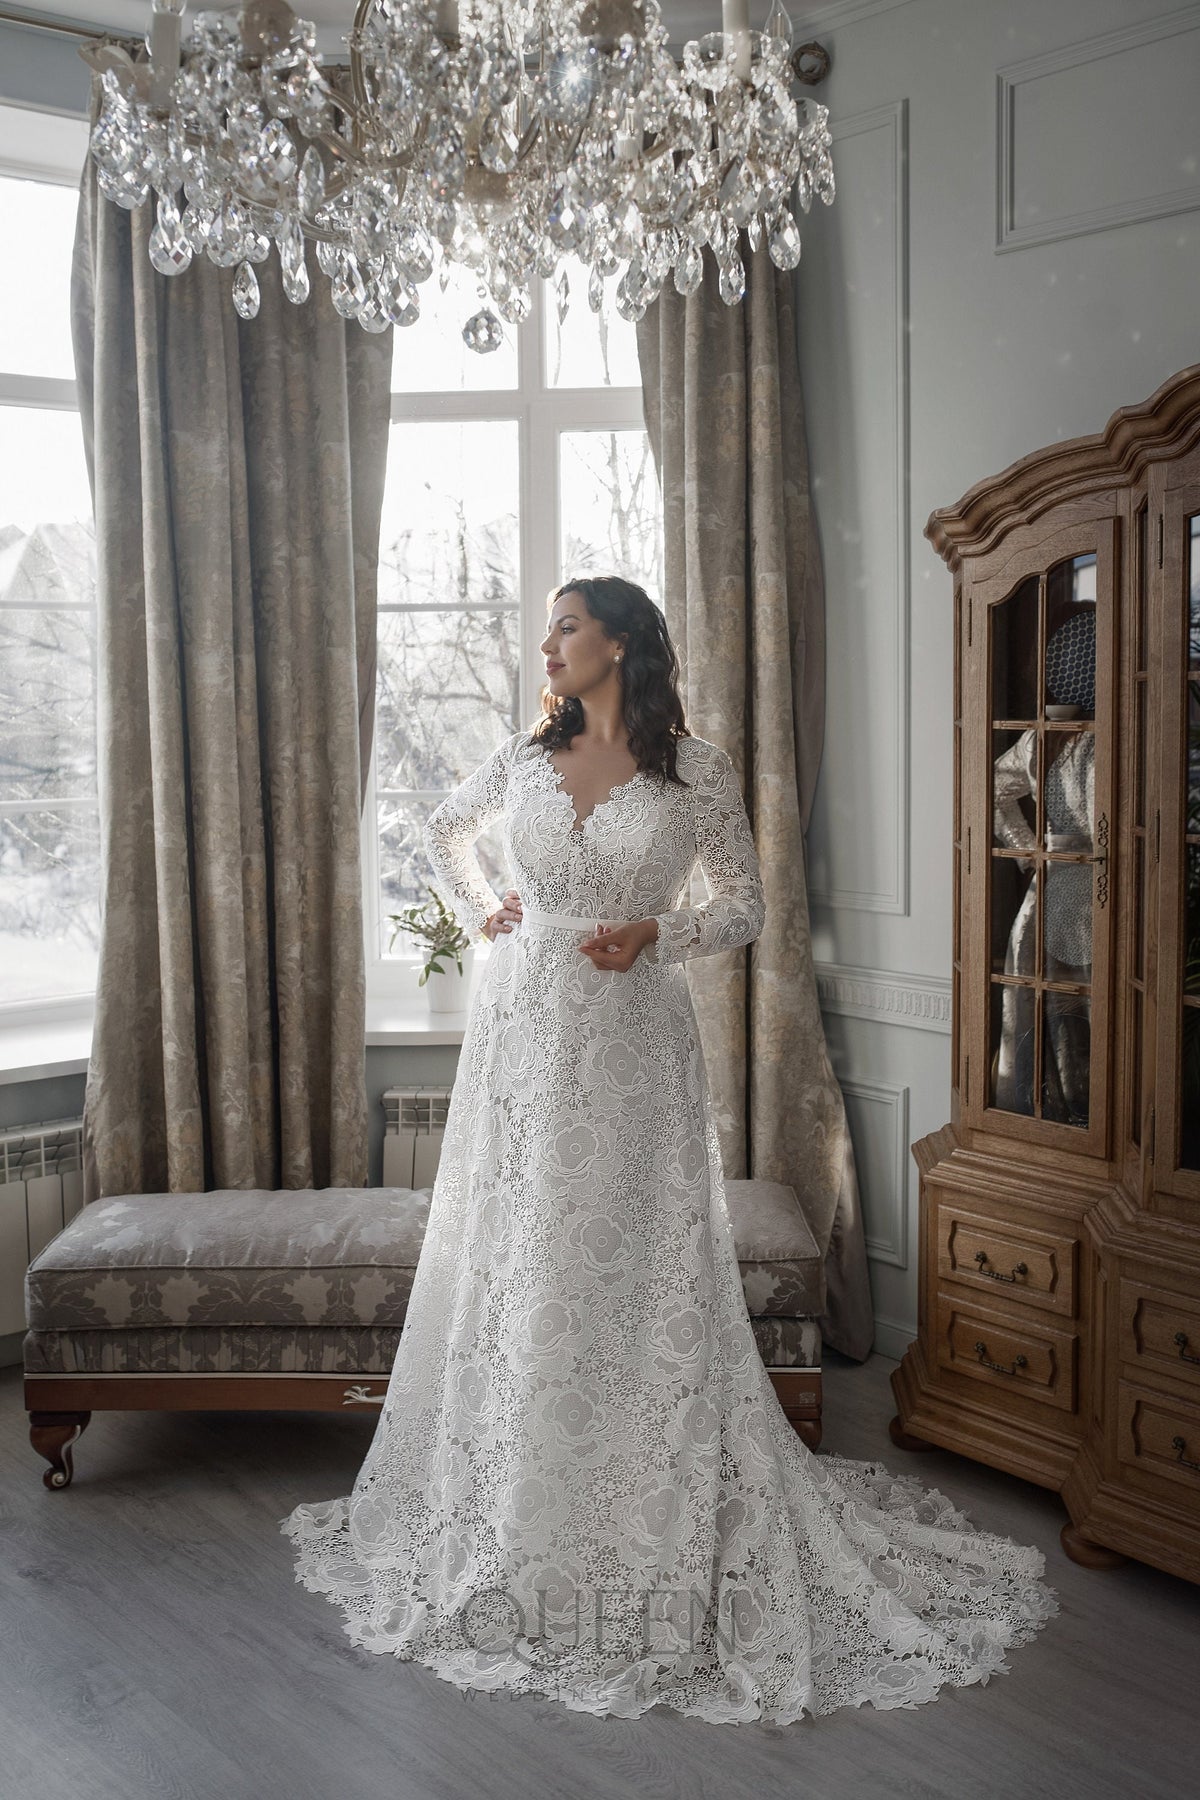 Beautiful ALine Long Sleeve All Over Lace Macrame Deep V Neckline Wedding Dress Bridal Gown with Lace Train and Corset Long Sleeve